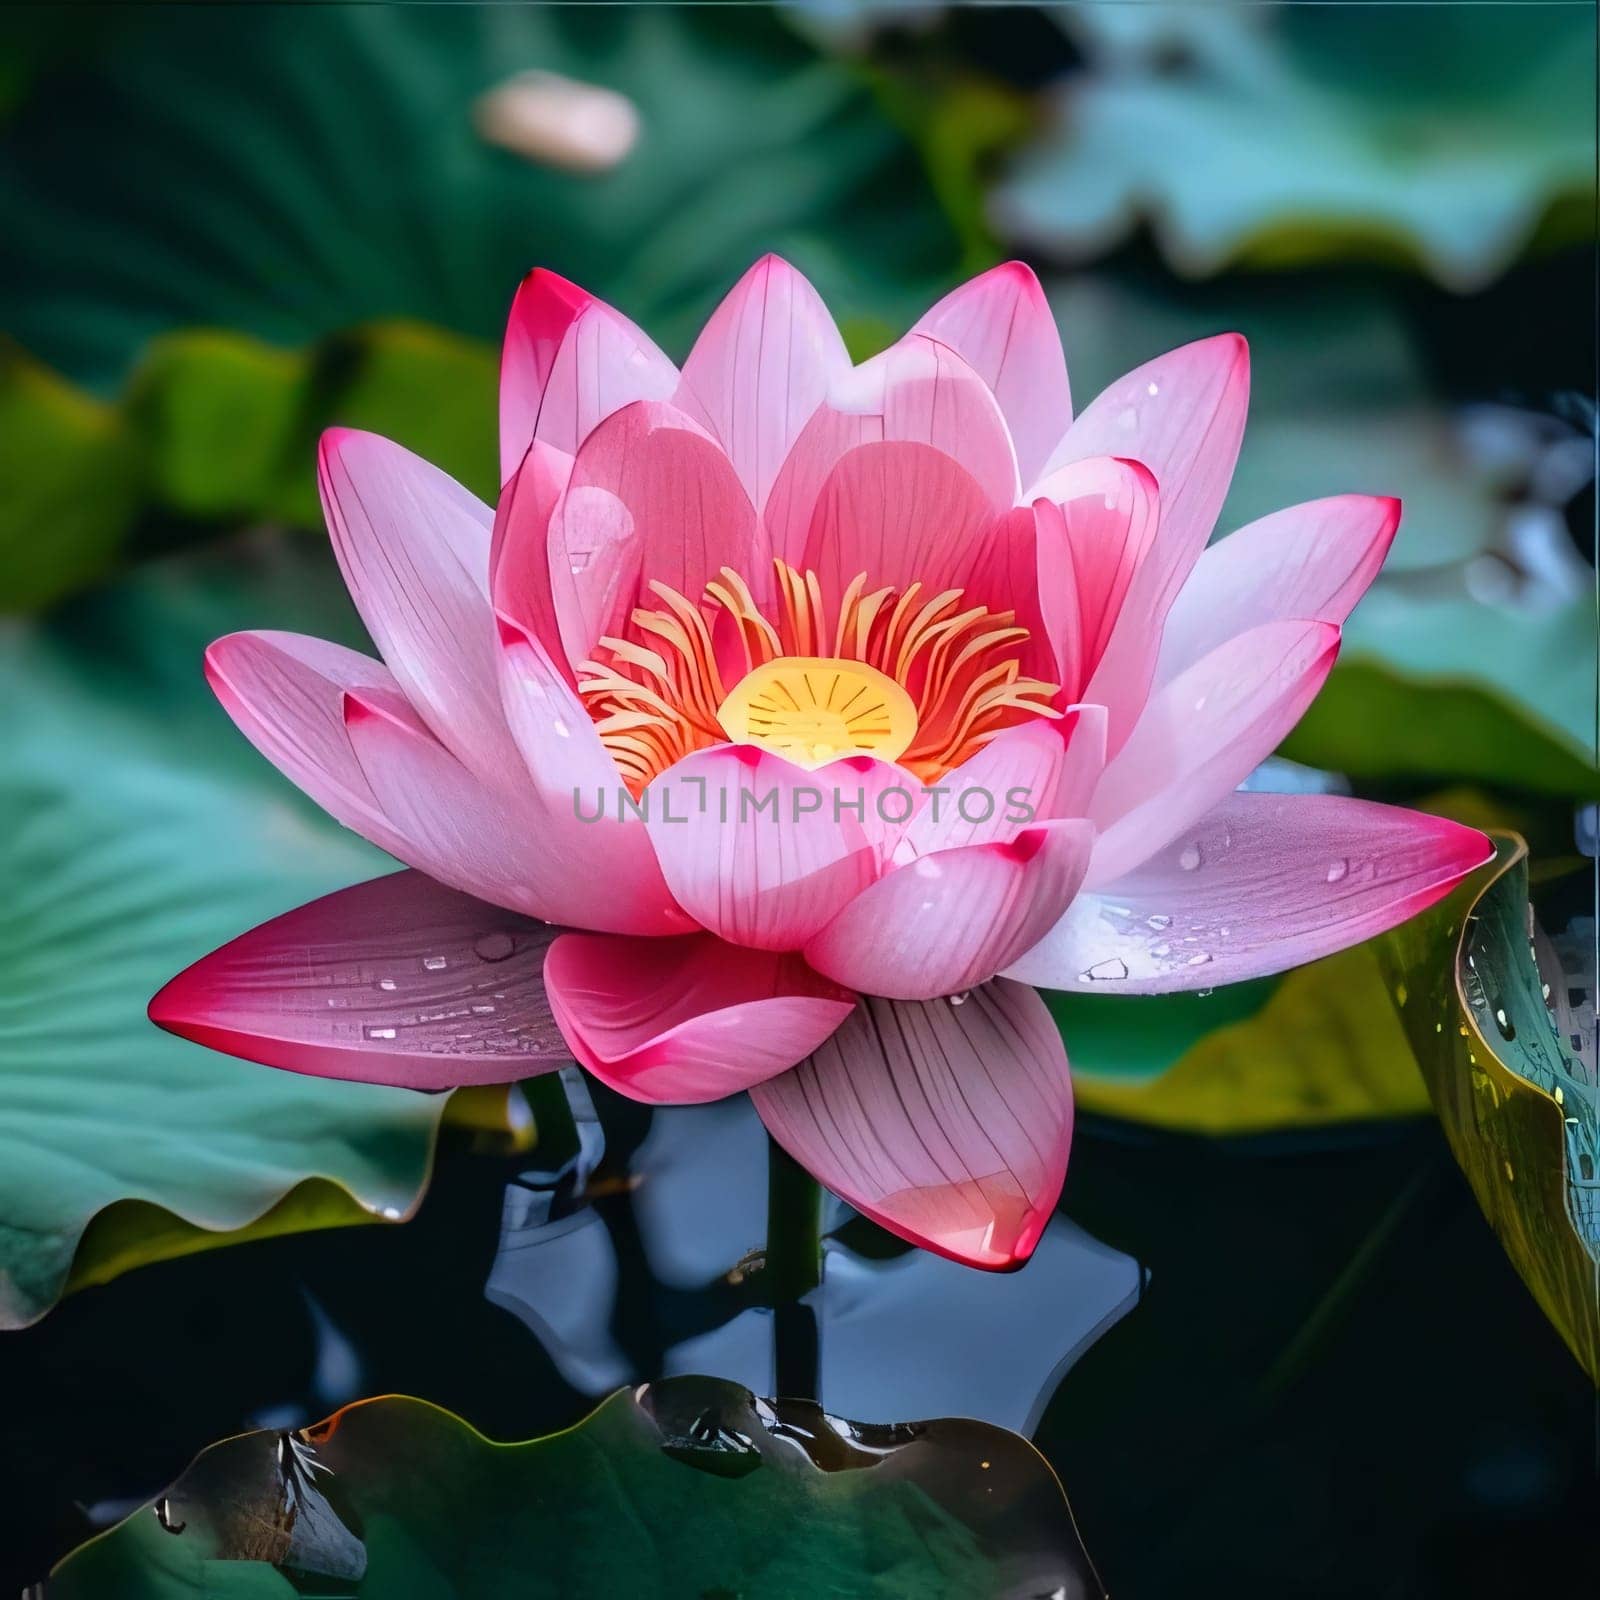 Pink water lily over water around green leaves. Flowering flowers, a symbol of spring, new life. A joyful time of nature waking up to life.